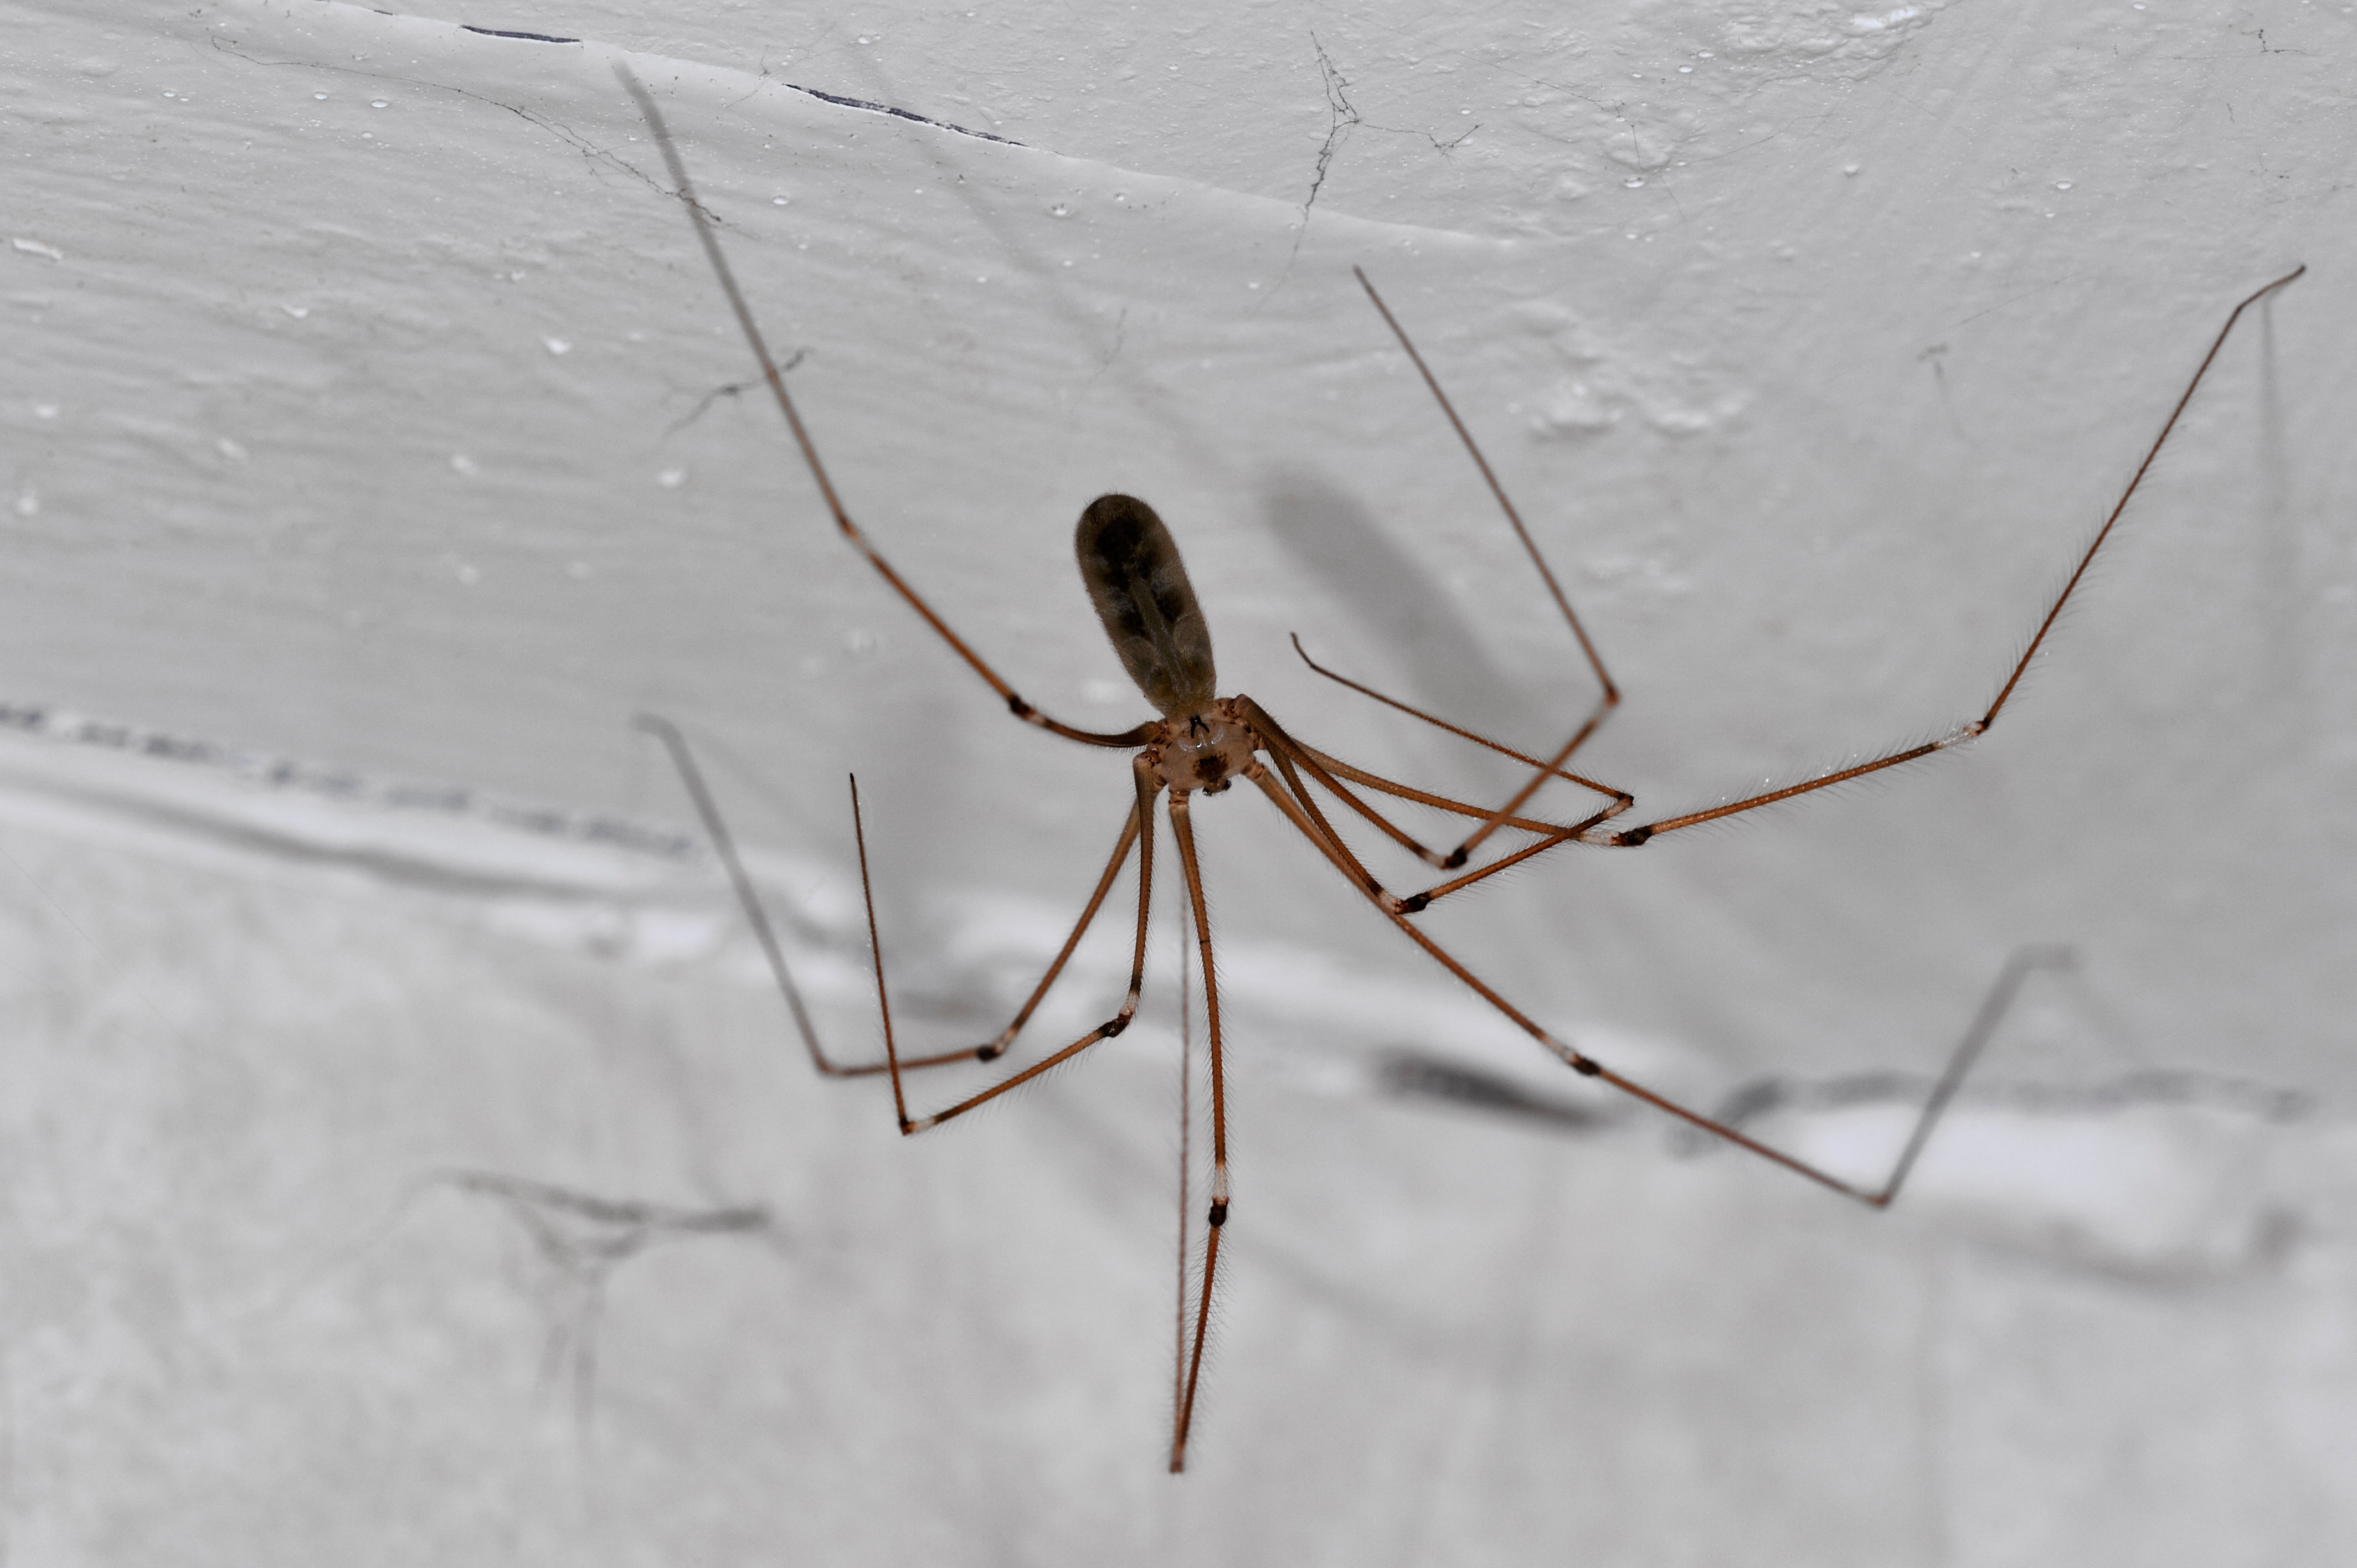 British homes being invaded by daddy-long legs spiders that will